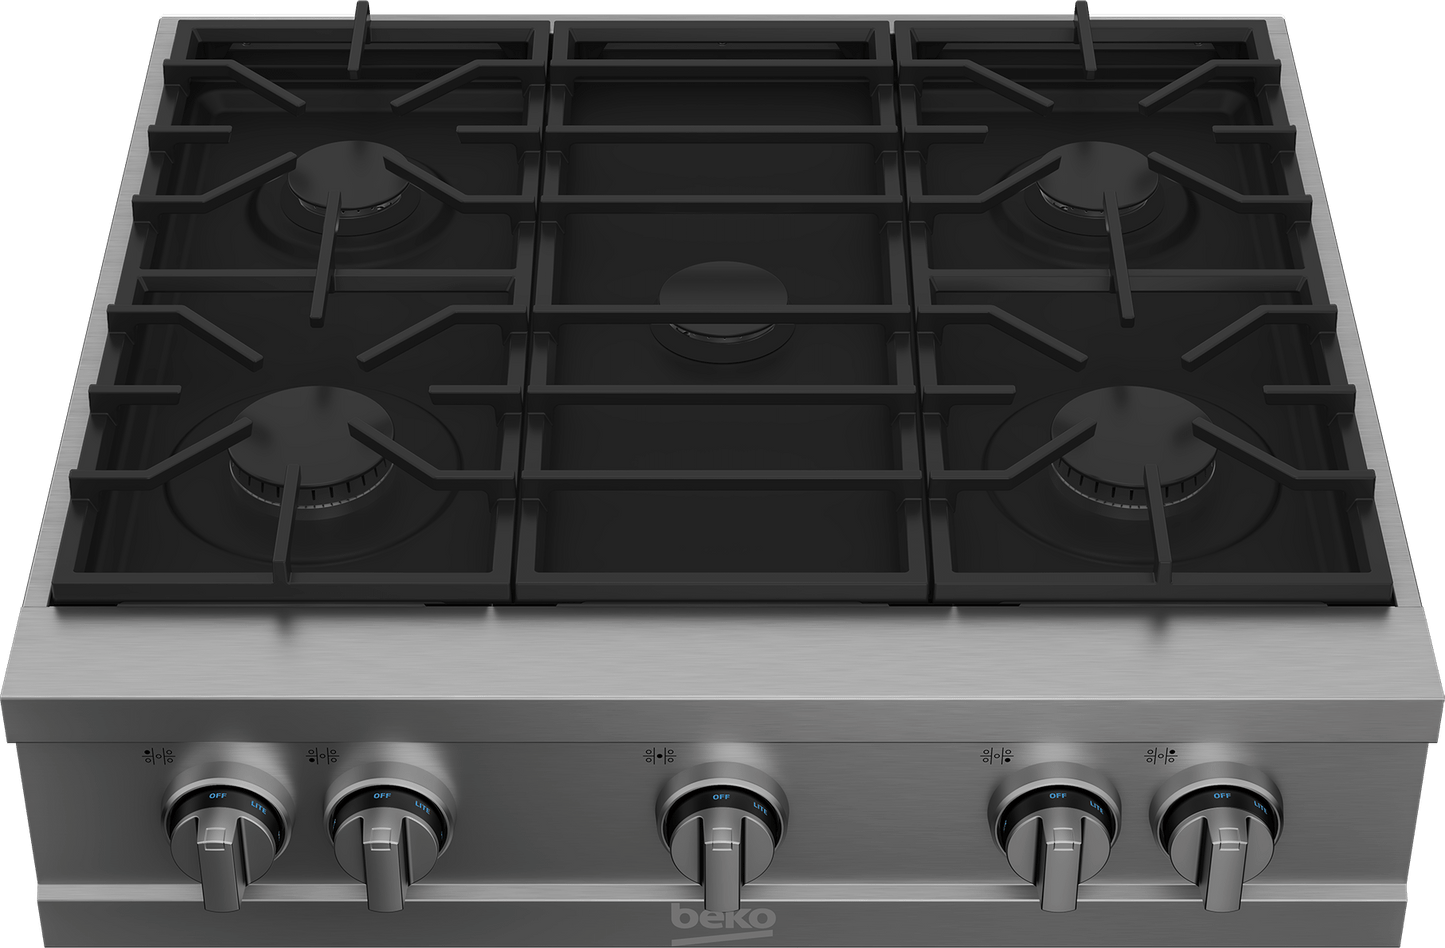 Beko PRGRT30500SS 30" Stainless Steel Pro-Style Built-In Gas Range Top